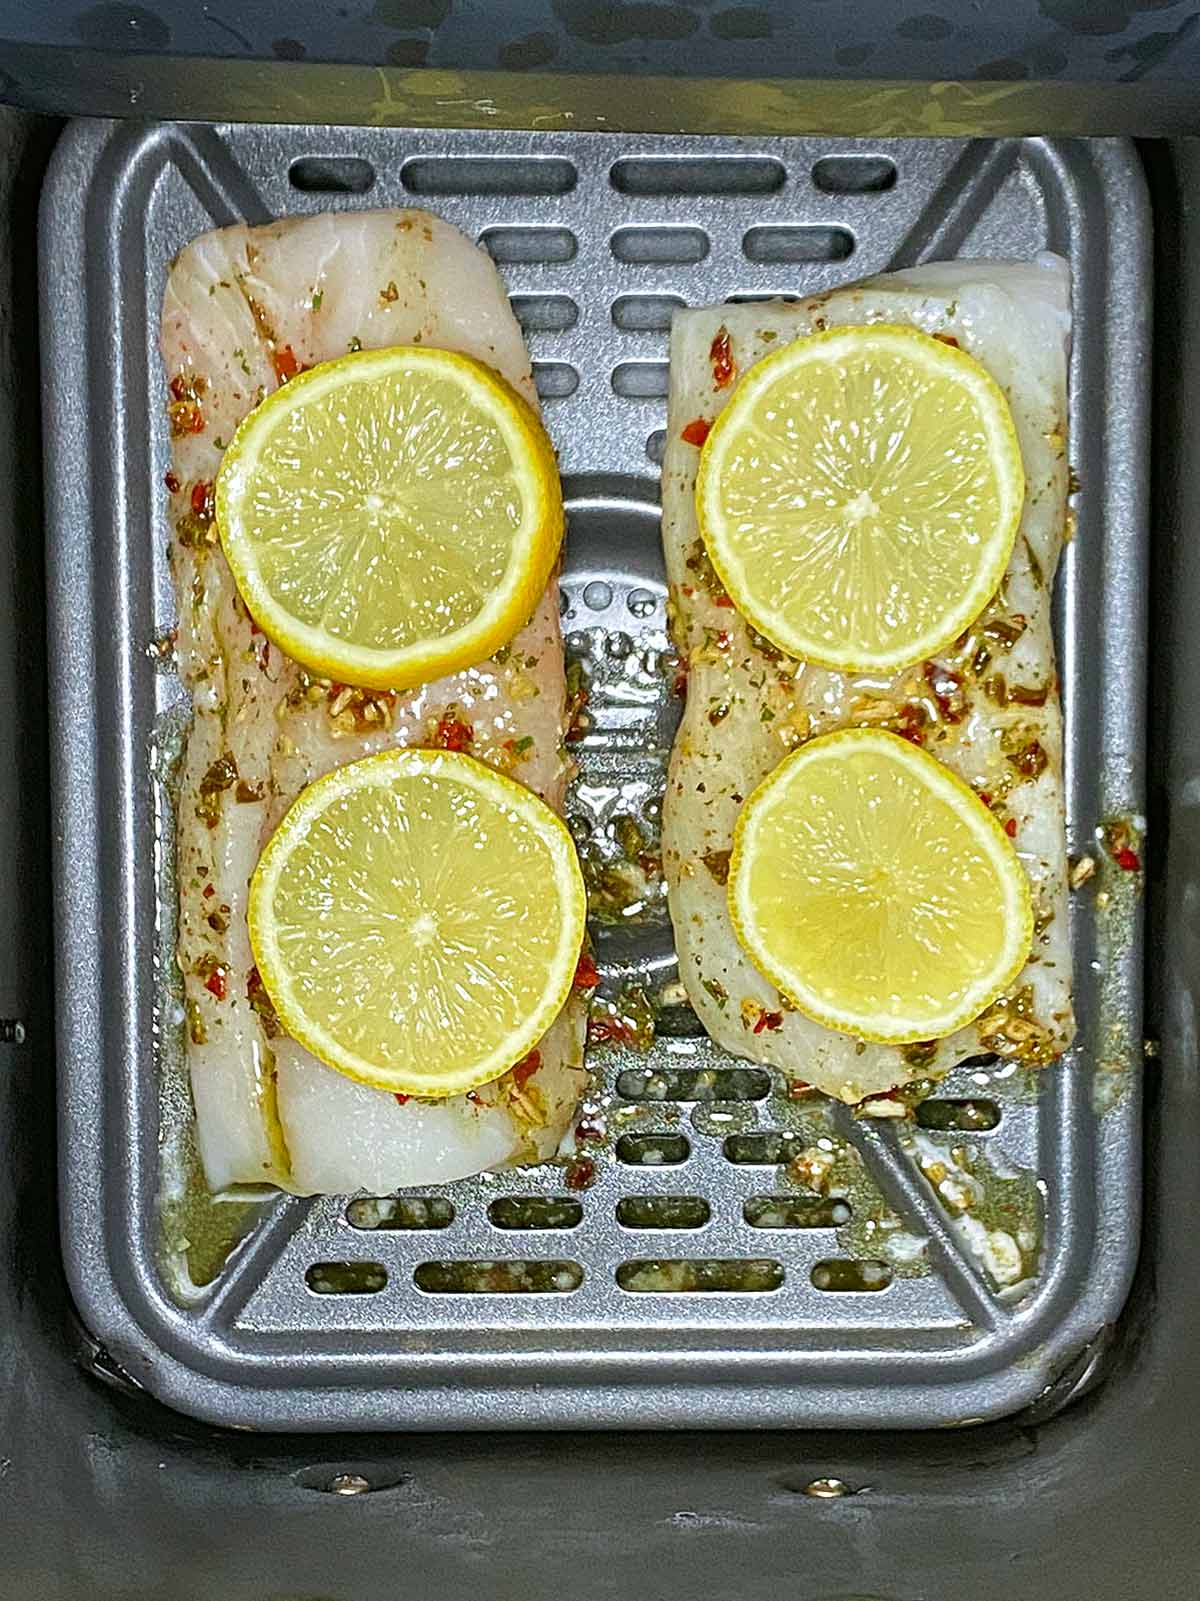 Lemon slices added to the cod.